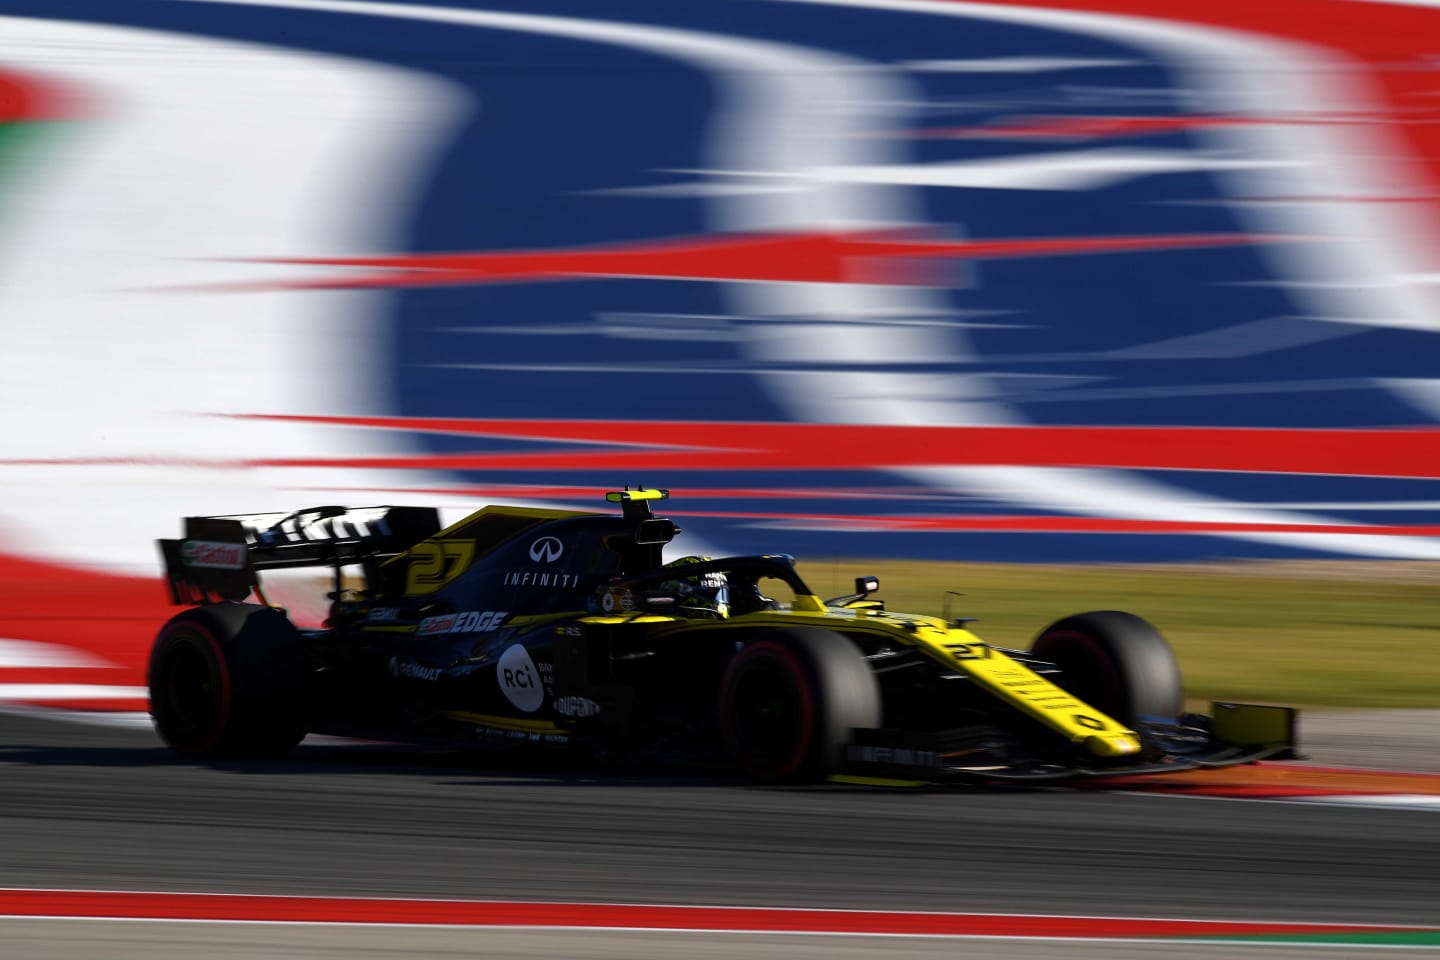 AUSTIN, TEXAS - NOVEMBER 02: Nico Hulkenberg of Germany driving the (27) Renault Sport Formula One Team RS19 on track during qualifying for the F1 Grand Prix of USA at Circuit of The Americas on November 02, 2019 in Austin, Texas. (Photo by Clive Mason/Getty Images)